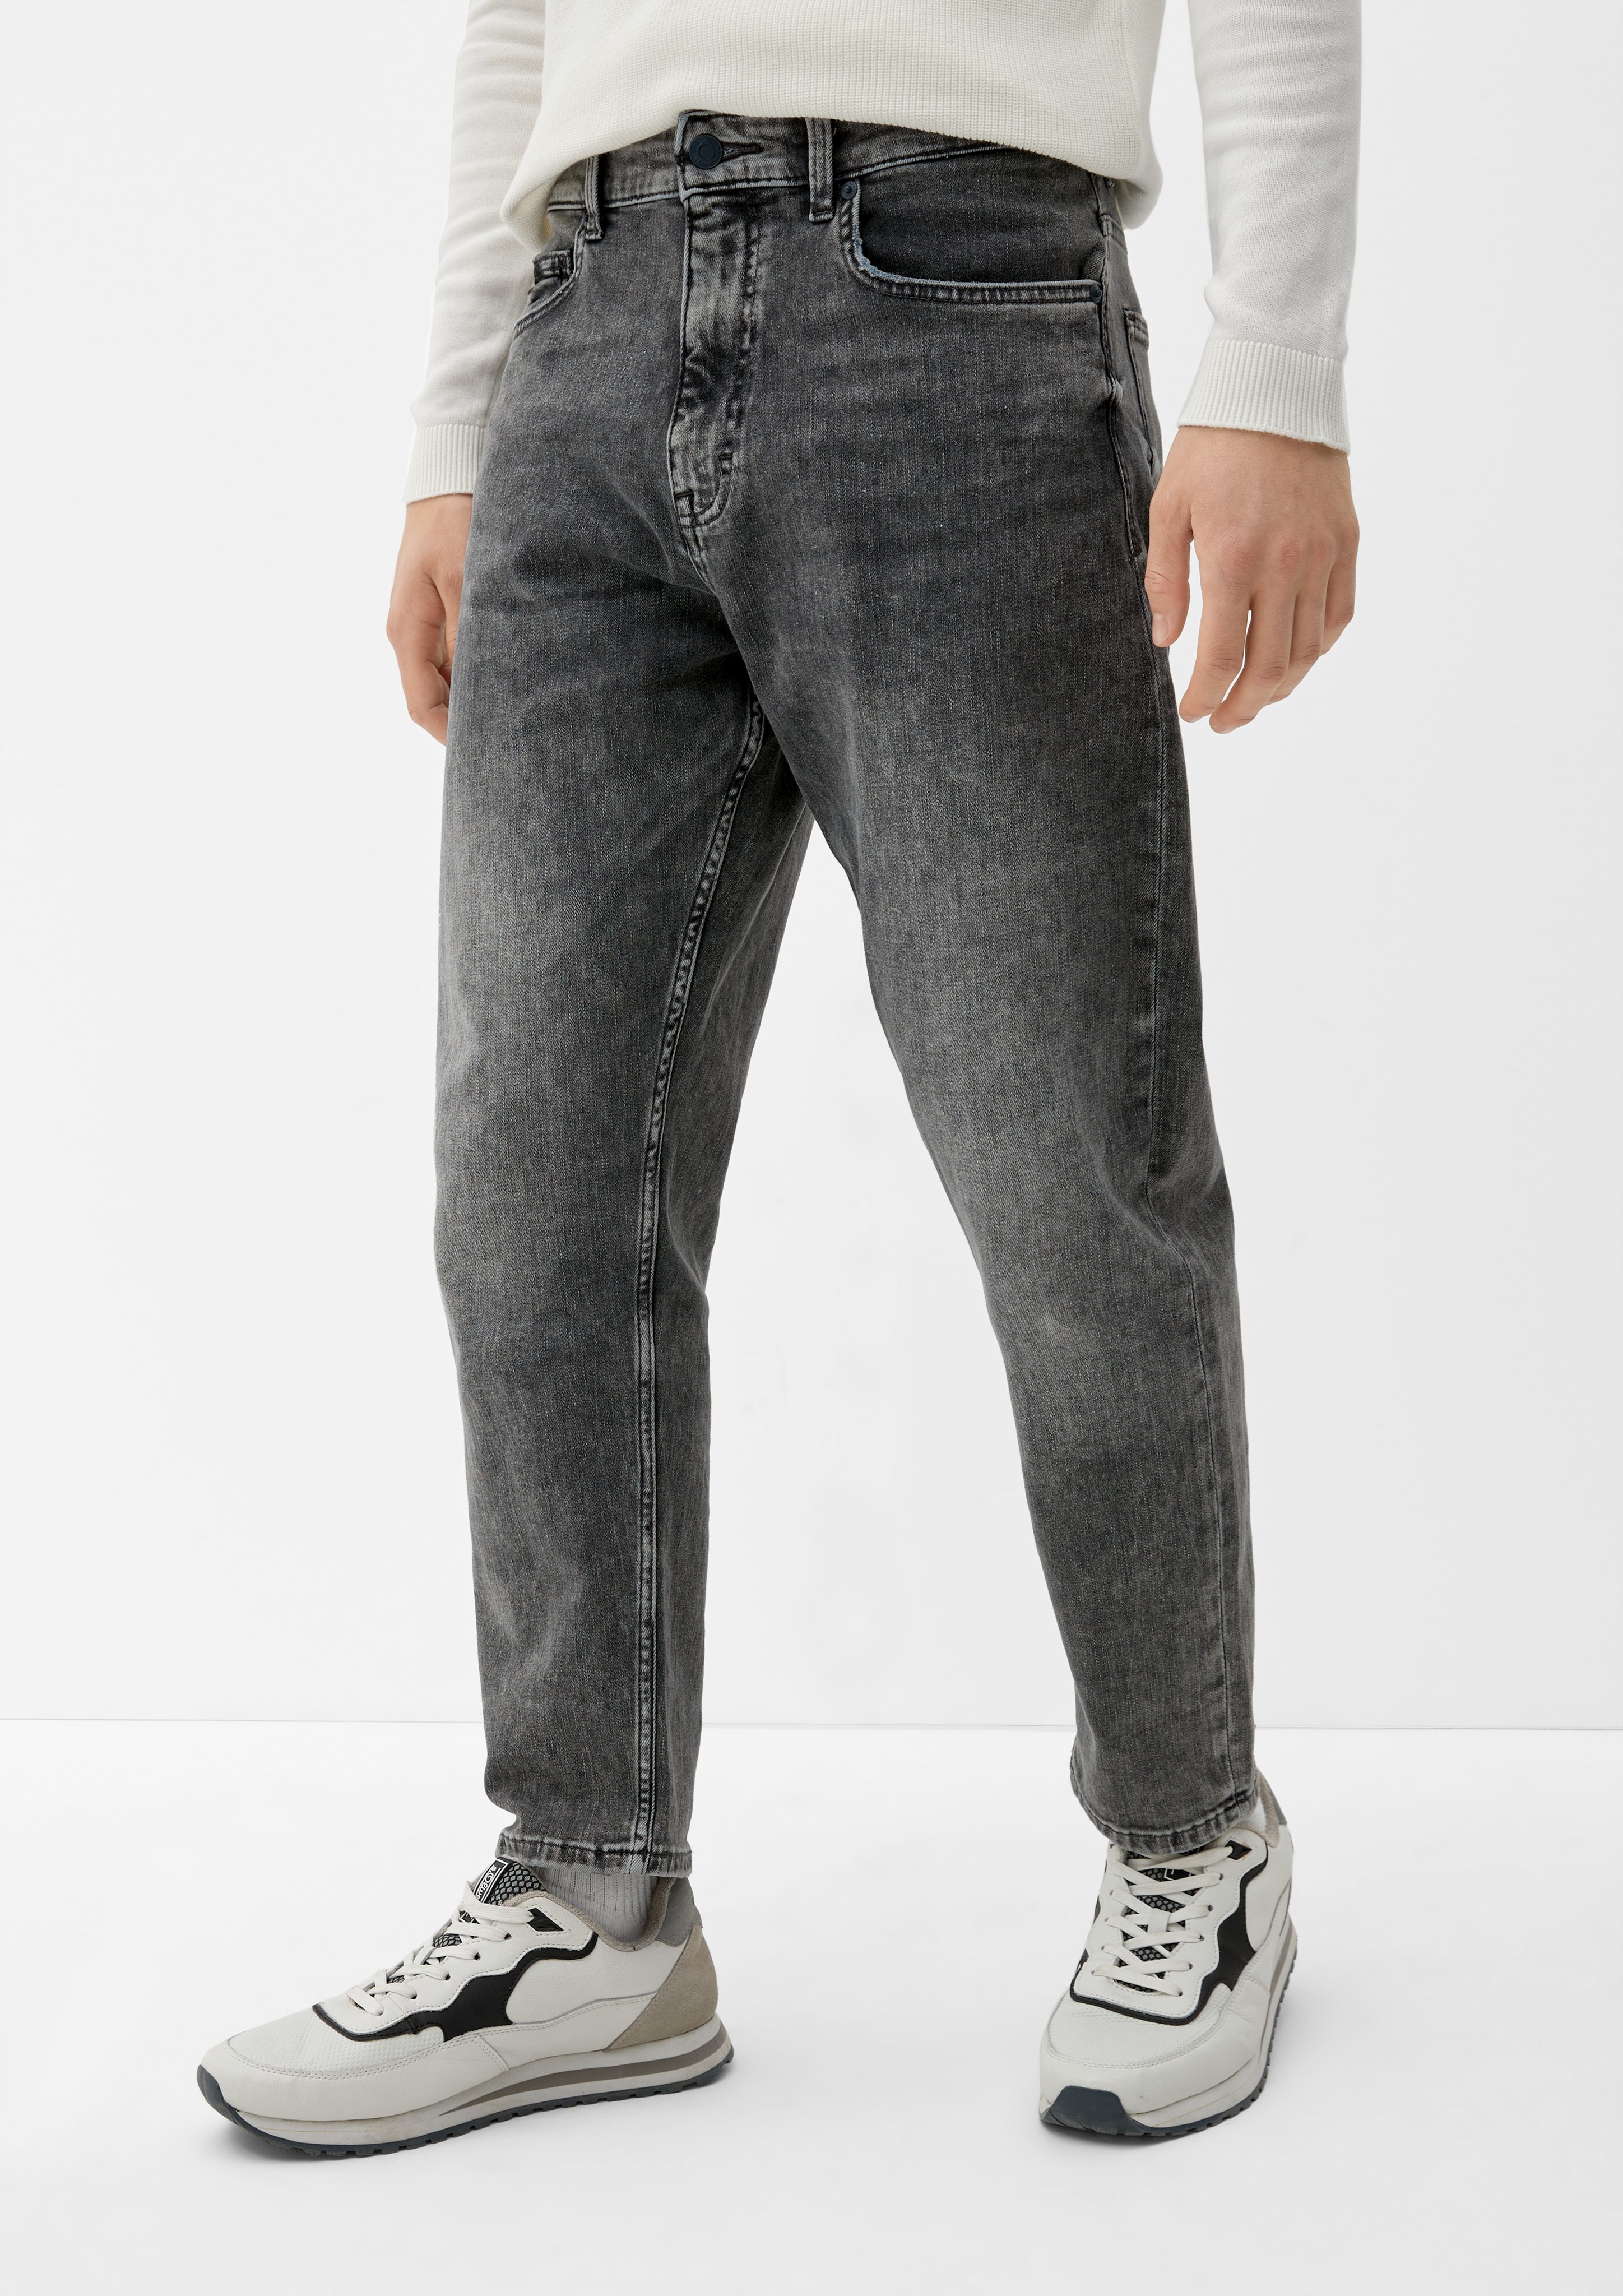 Label-Patch / Stoffhose Brad Relaxed Waschung, / Mid Jeans Leg / QS Tapered Rise Fit